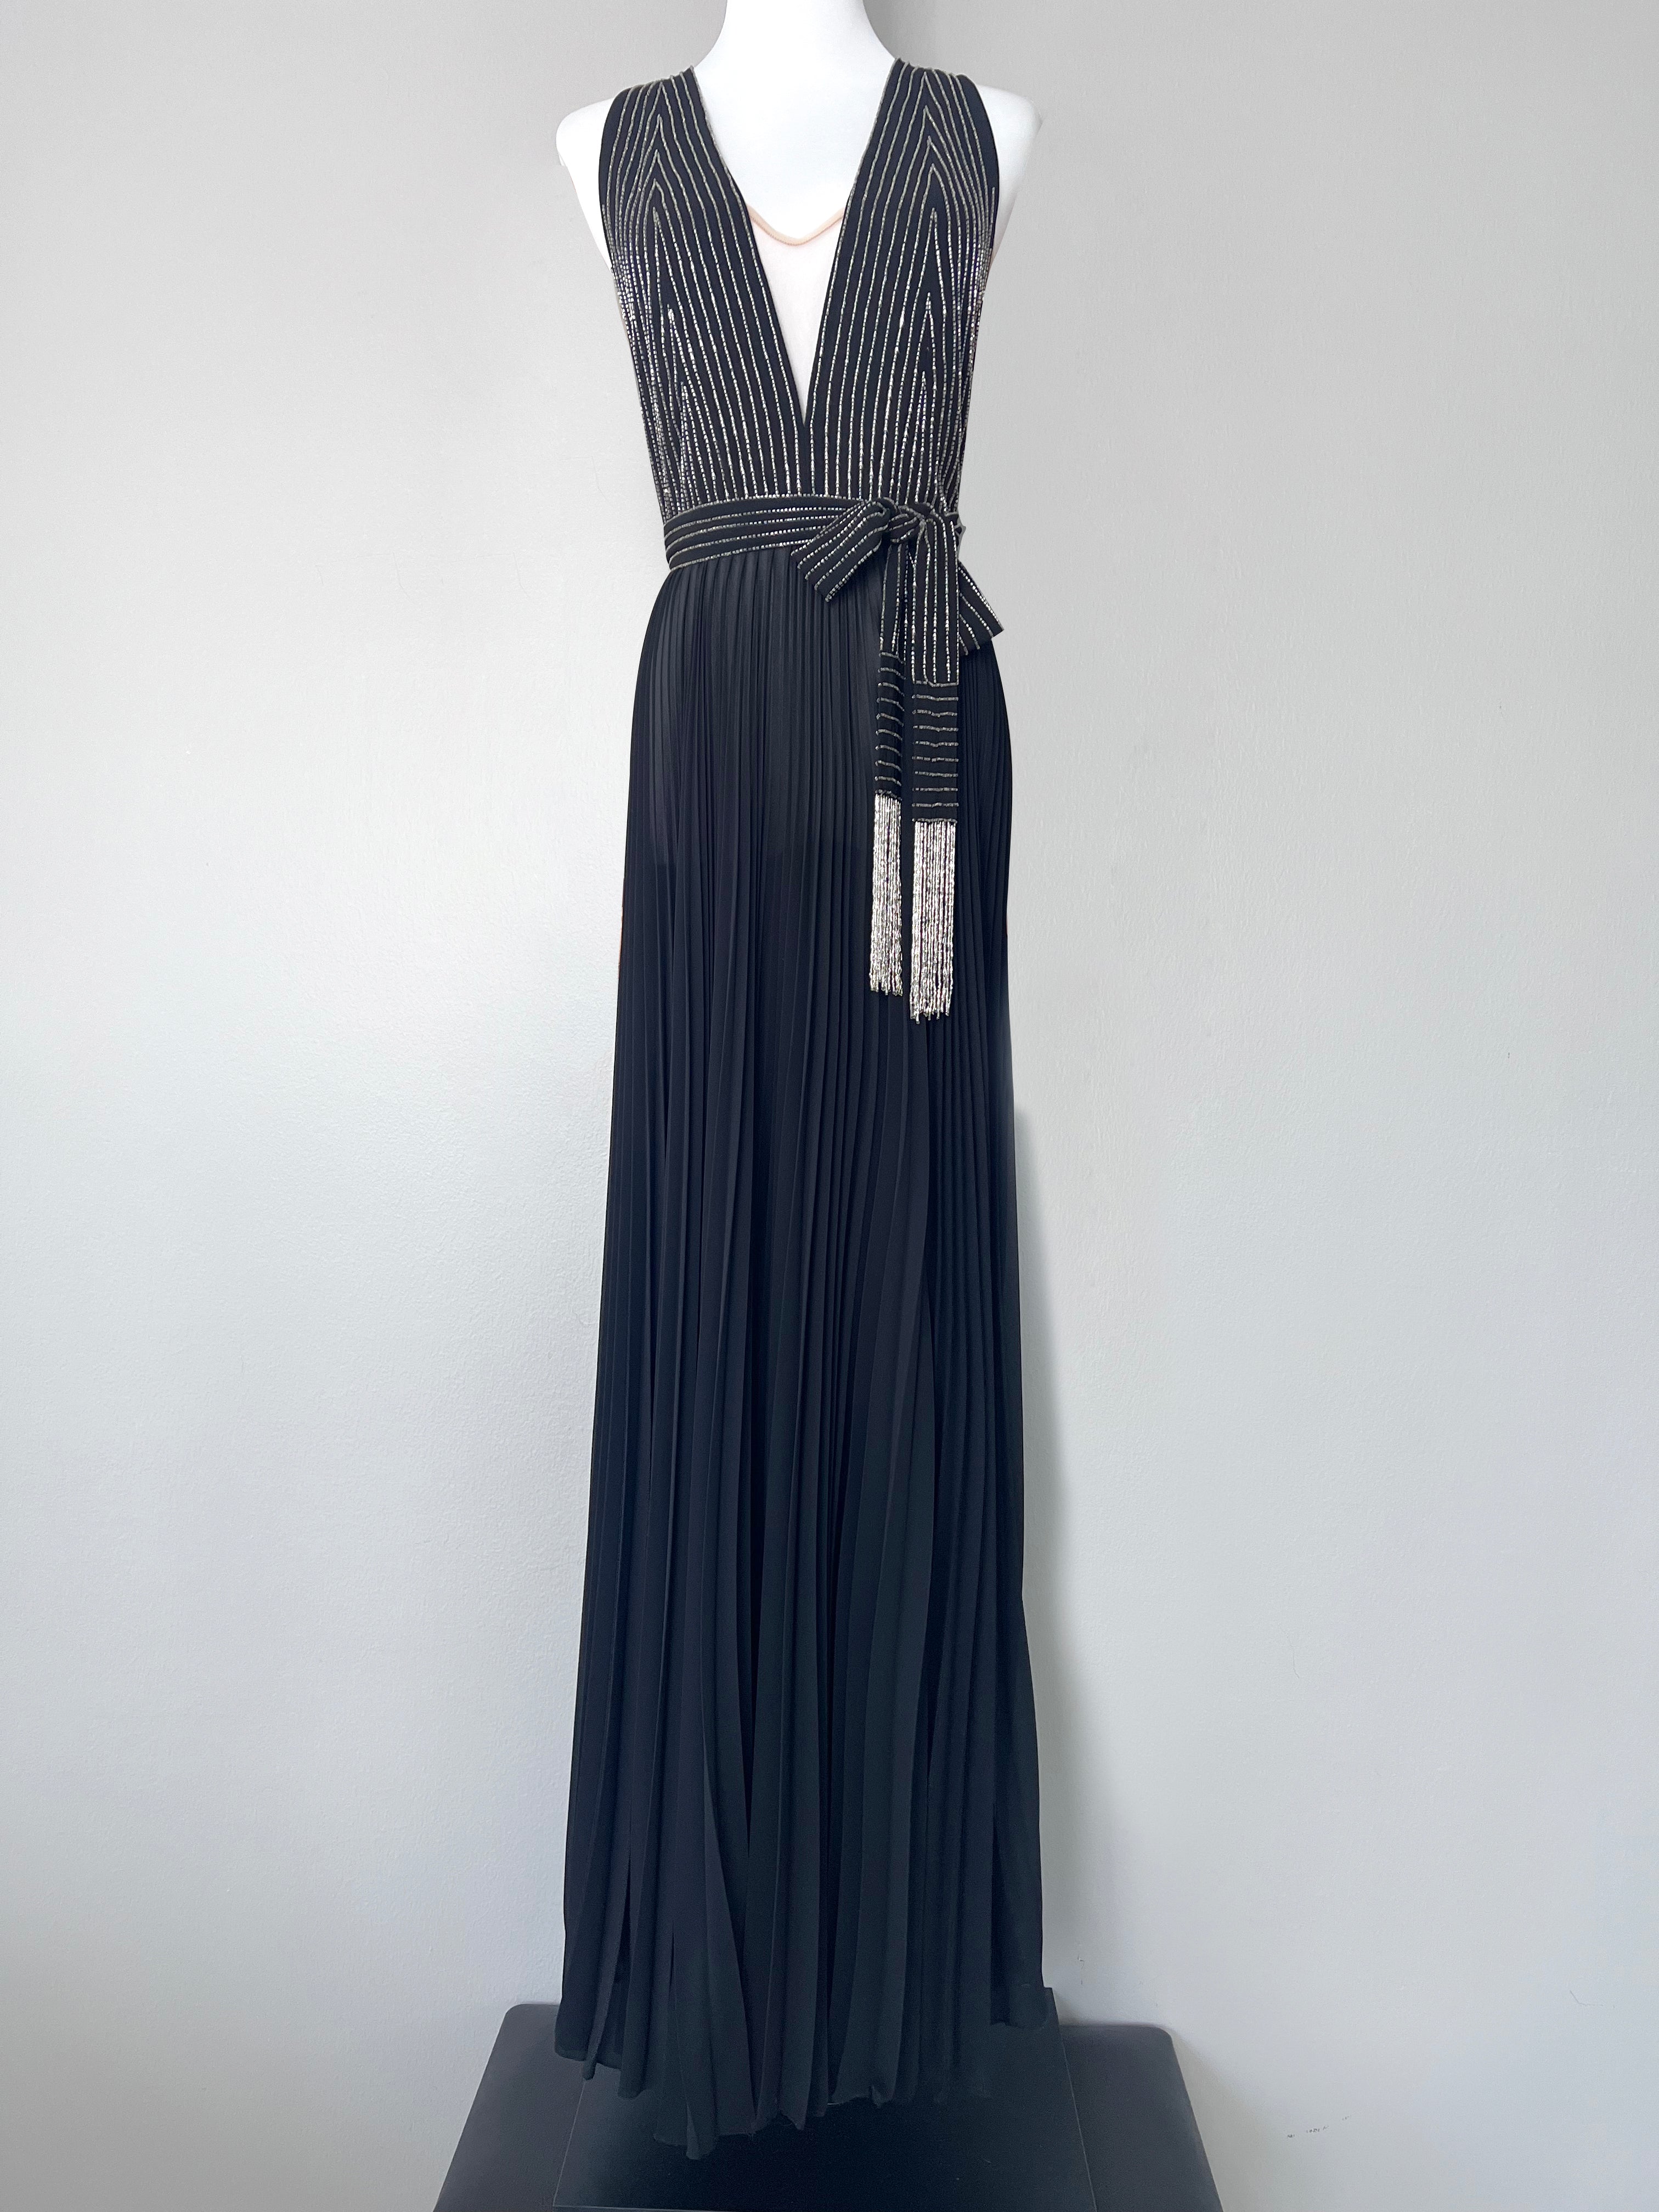 BRAND NEW ! Black Long rhombus design dress with plunging neckline with beads pleated skirt - Elisabetta Franchi Red Carpet